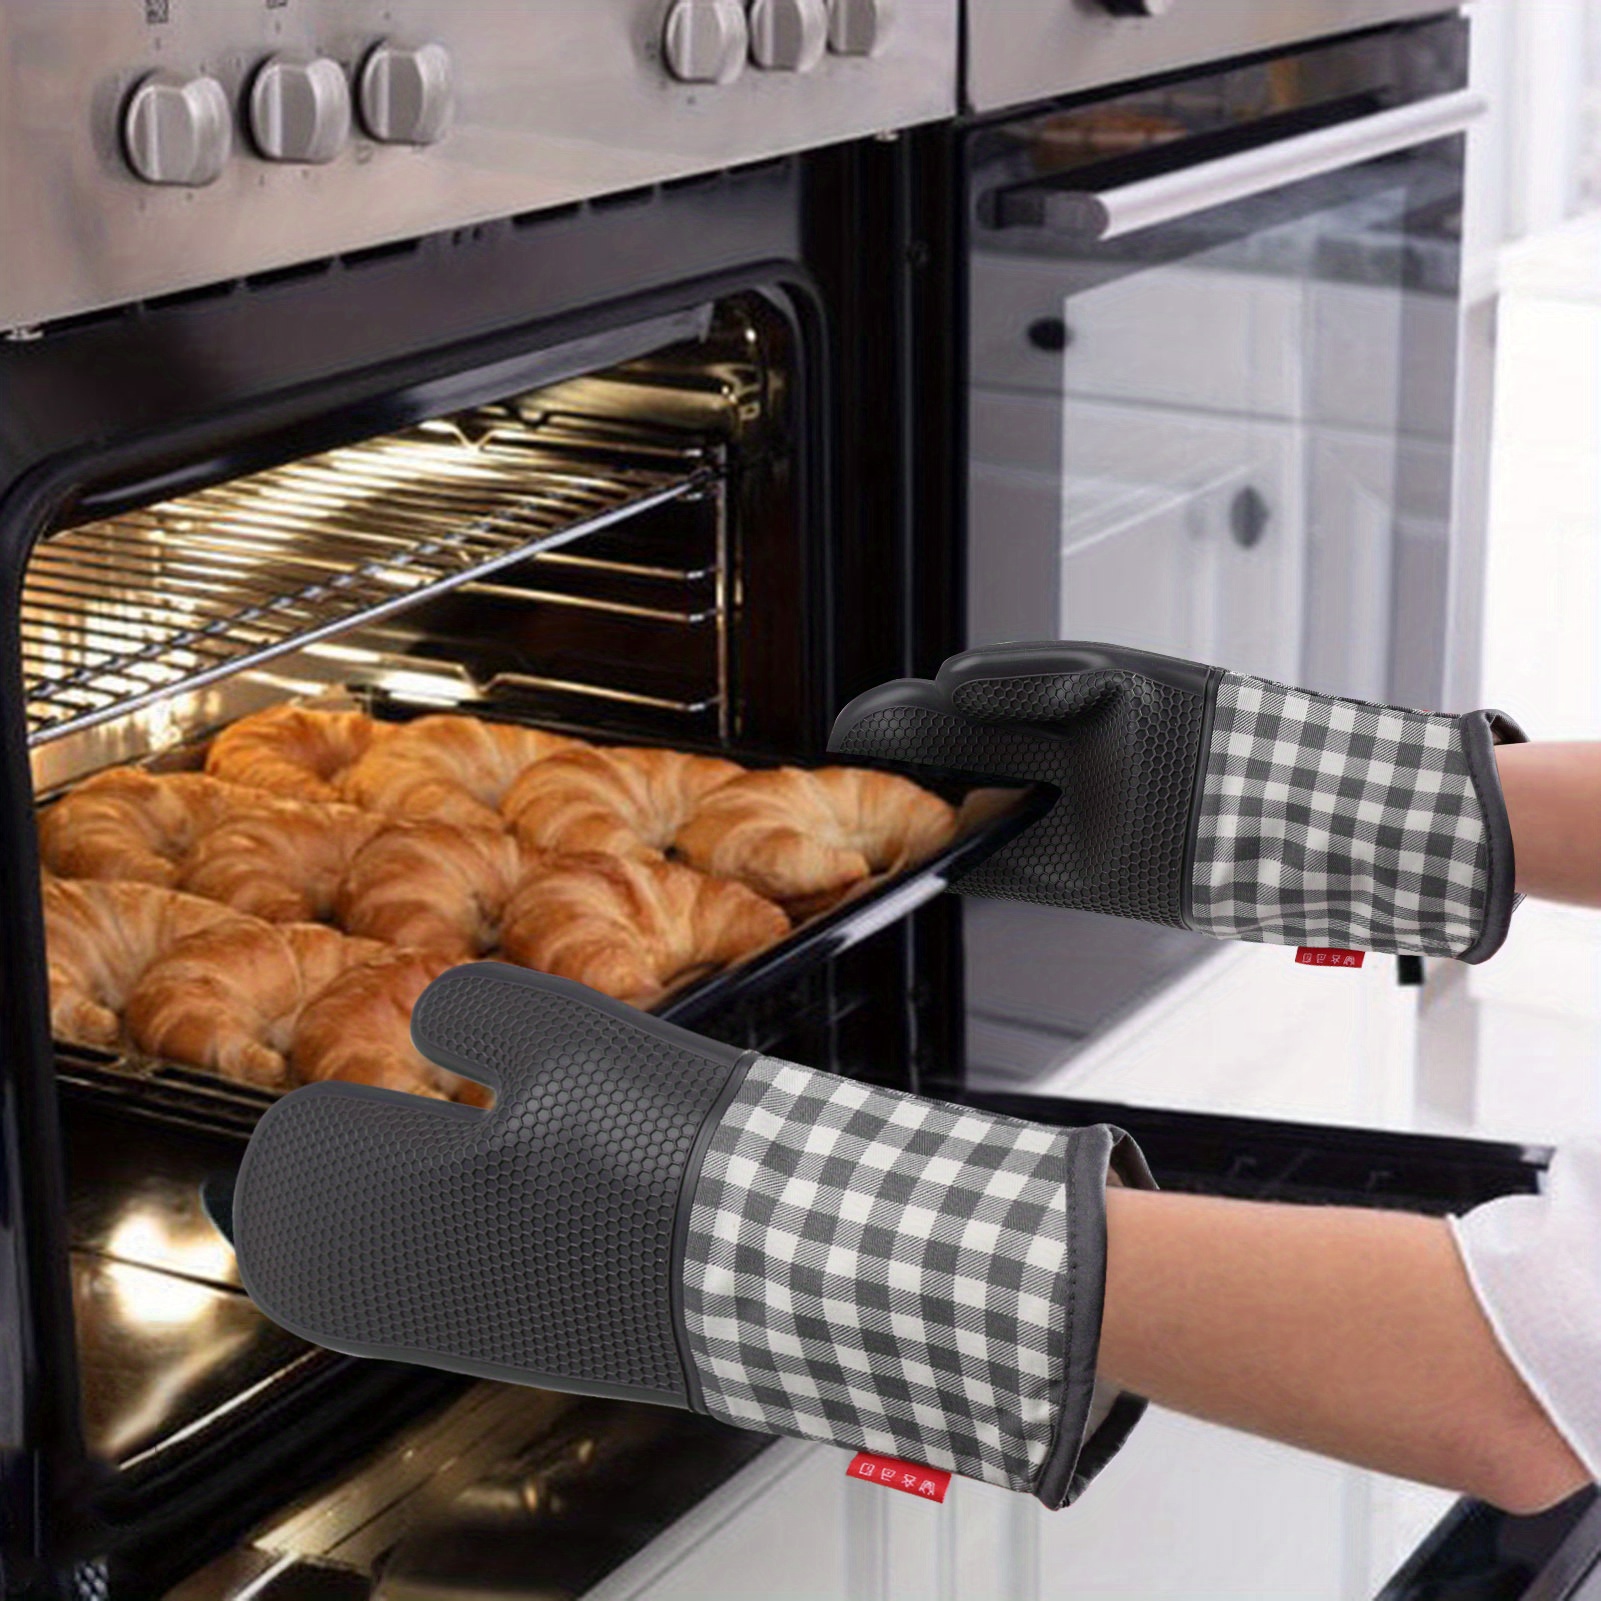 Silicone Oven Mitts And Pot Holder, Thickened Heat Resistant Gloves And  Heat Insulation Pad, Non-slip Bpa-free Oven Mitts For Bbq, Baking, Cooking,  Grilling, Hot Pads For Hot Dishes Or Pans, Home Kitchen